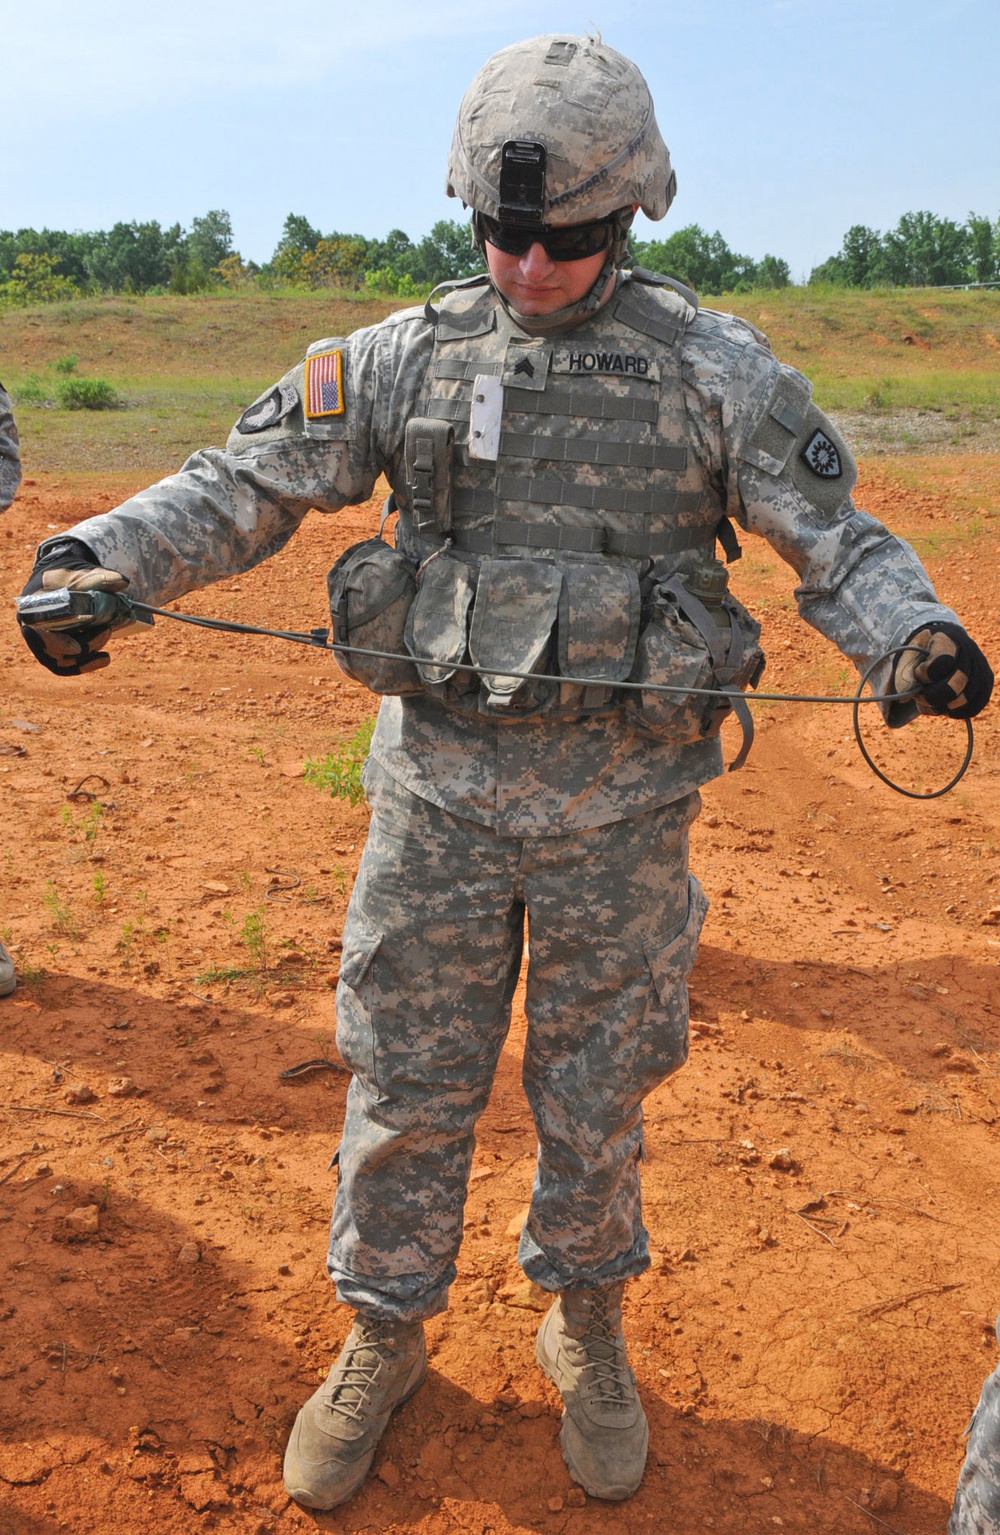 Taking charge: Sapper Company blasts through training